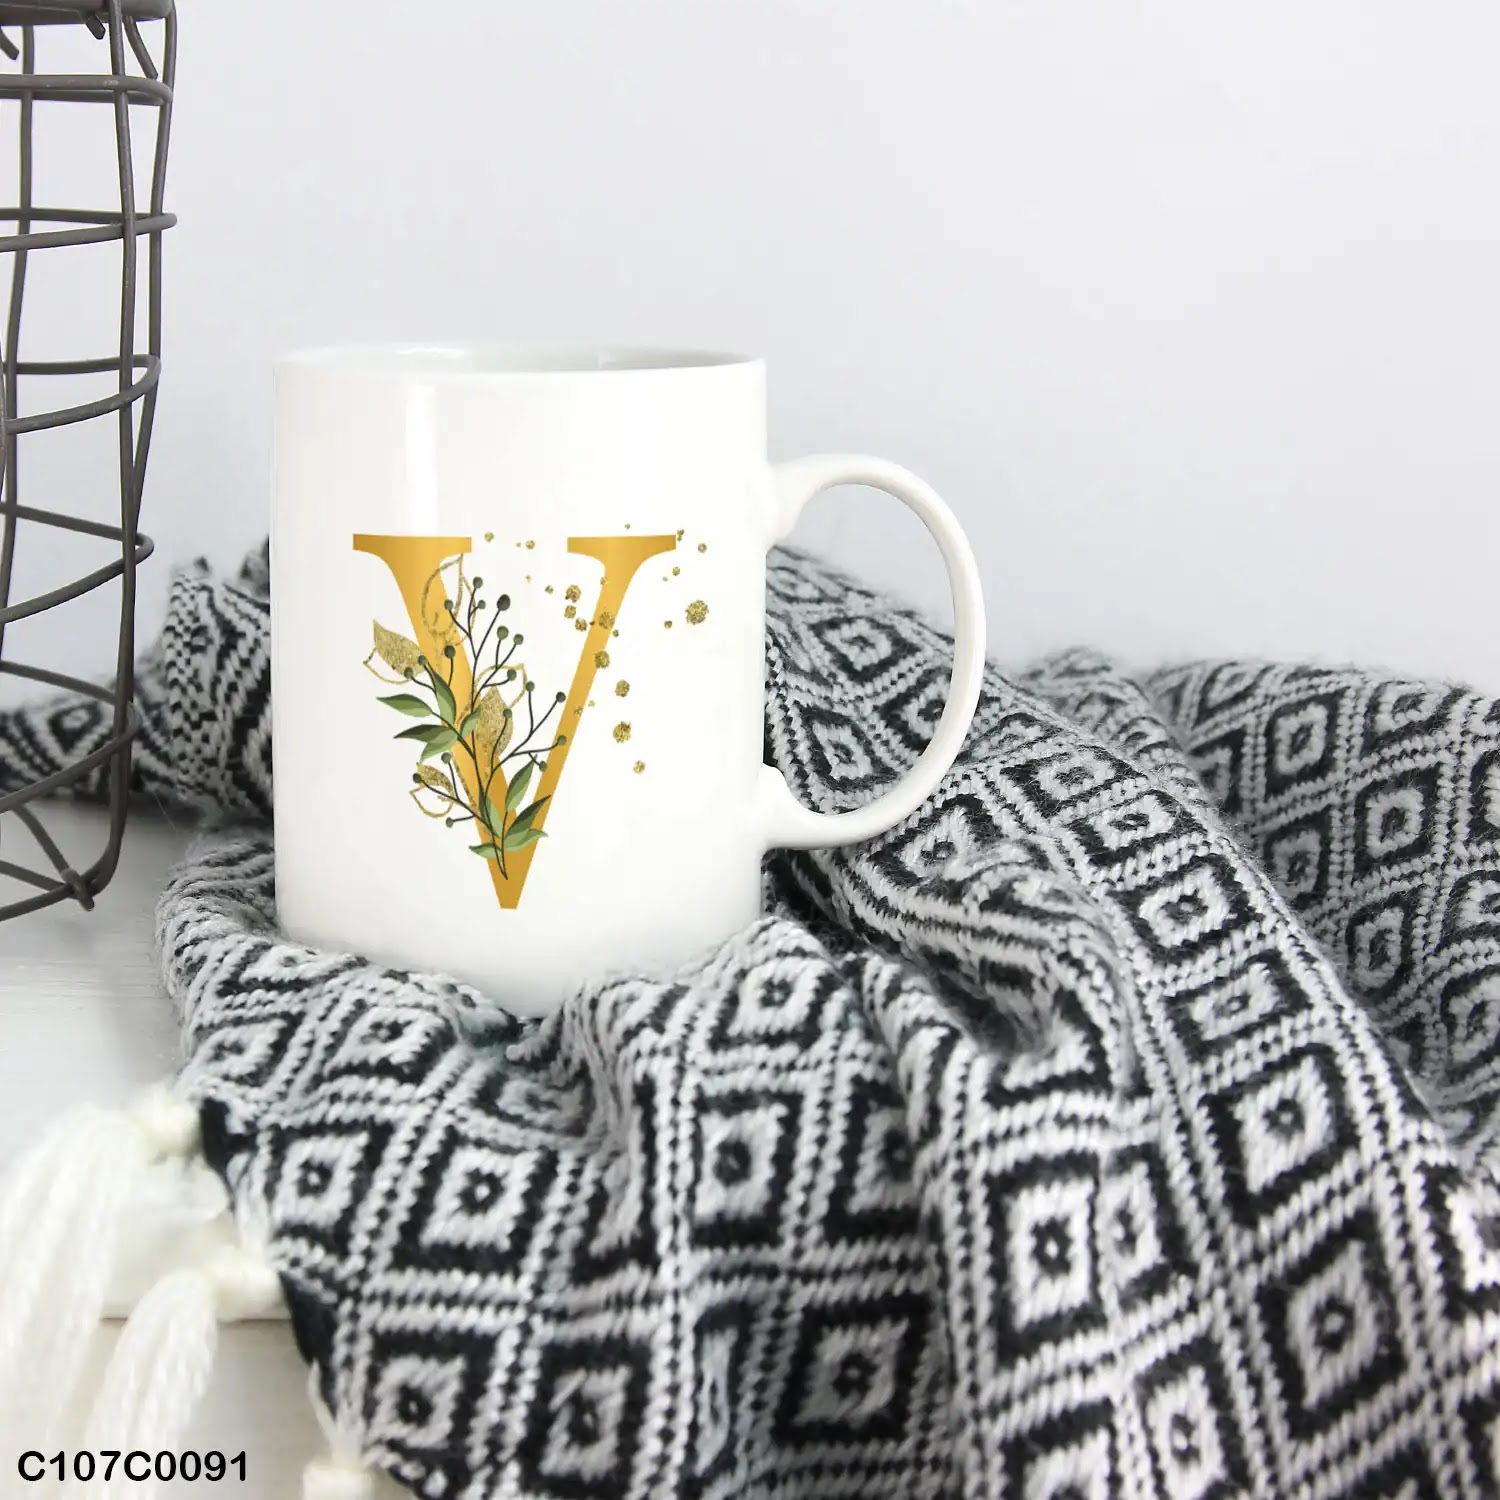 A white mug (cup) printed with gold Letter "V"and small green branch